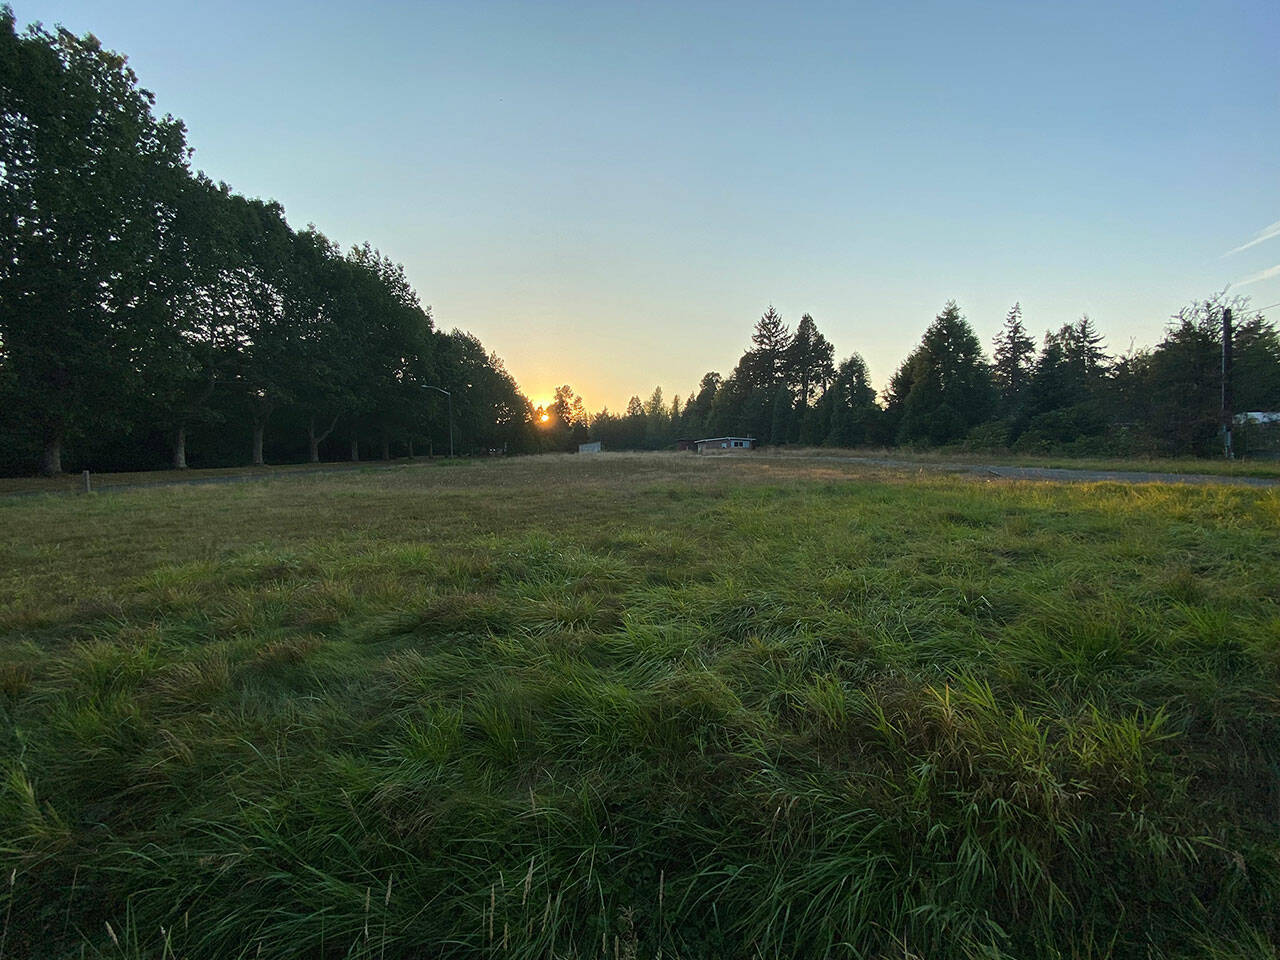 Vashon Health Care District closed on this 2.3-acre property, located on Vashon Highway just south of Kathy’s Corner garden center, where it eventually intends to build a community-owned primary health care clinic. (Tom Hughes Photo)